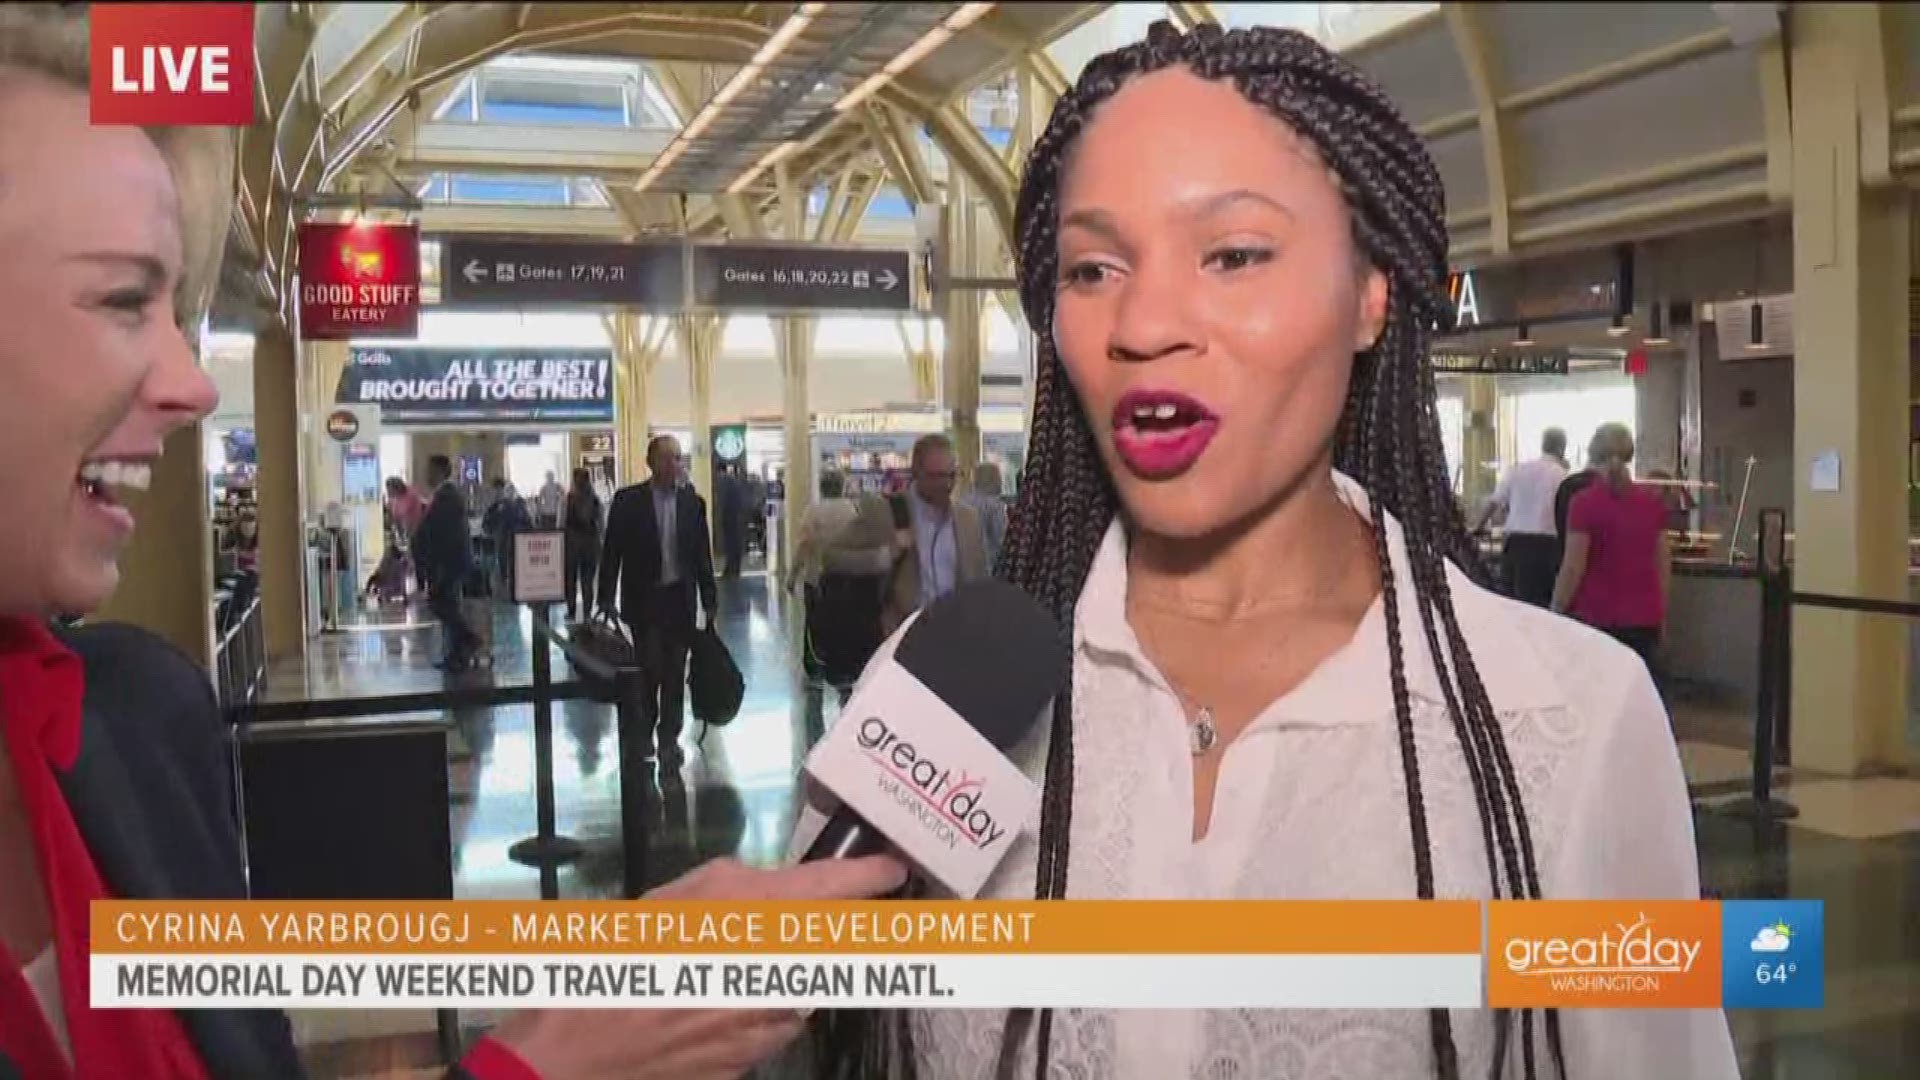 Andi gets the low down on the dining and spa options at Reagan National Airport so you can dine or get pampered while waiting for your flight.